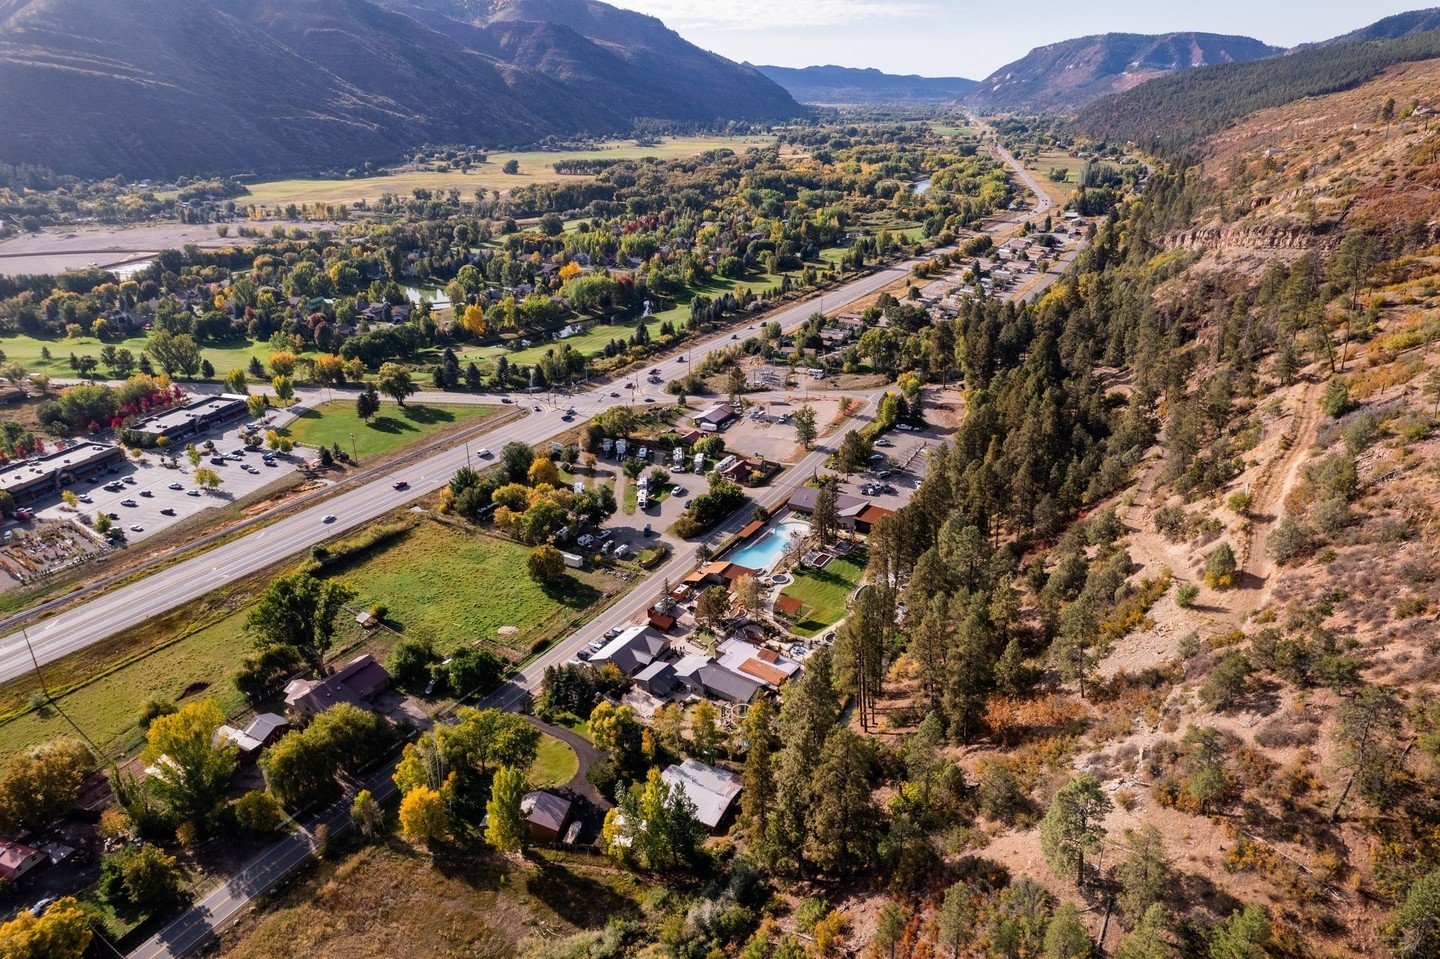 We're ready for some Durango Hot Springs. Doesn't this sound awesome after watching everyone crush the climbs this weekend at the Iron Horse Bicycle Classic? We hope the racers and riders join us, too! 😄⁠
⁠
We hope to do the citizens tour one of the